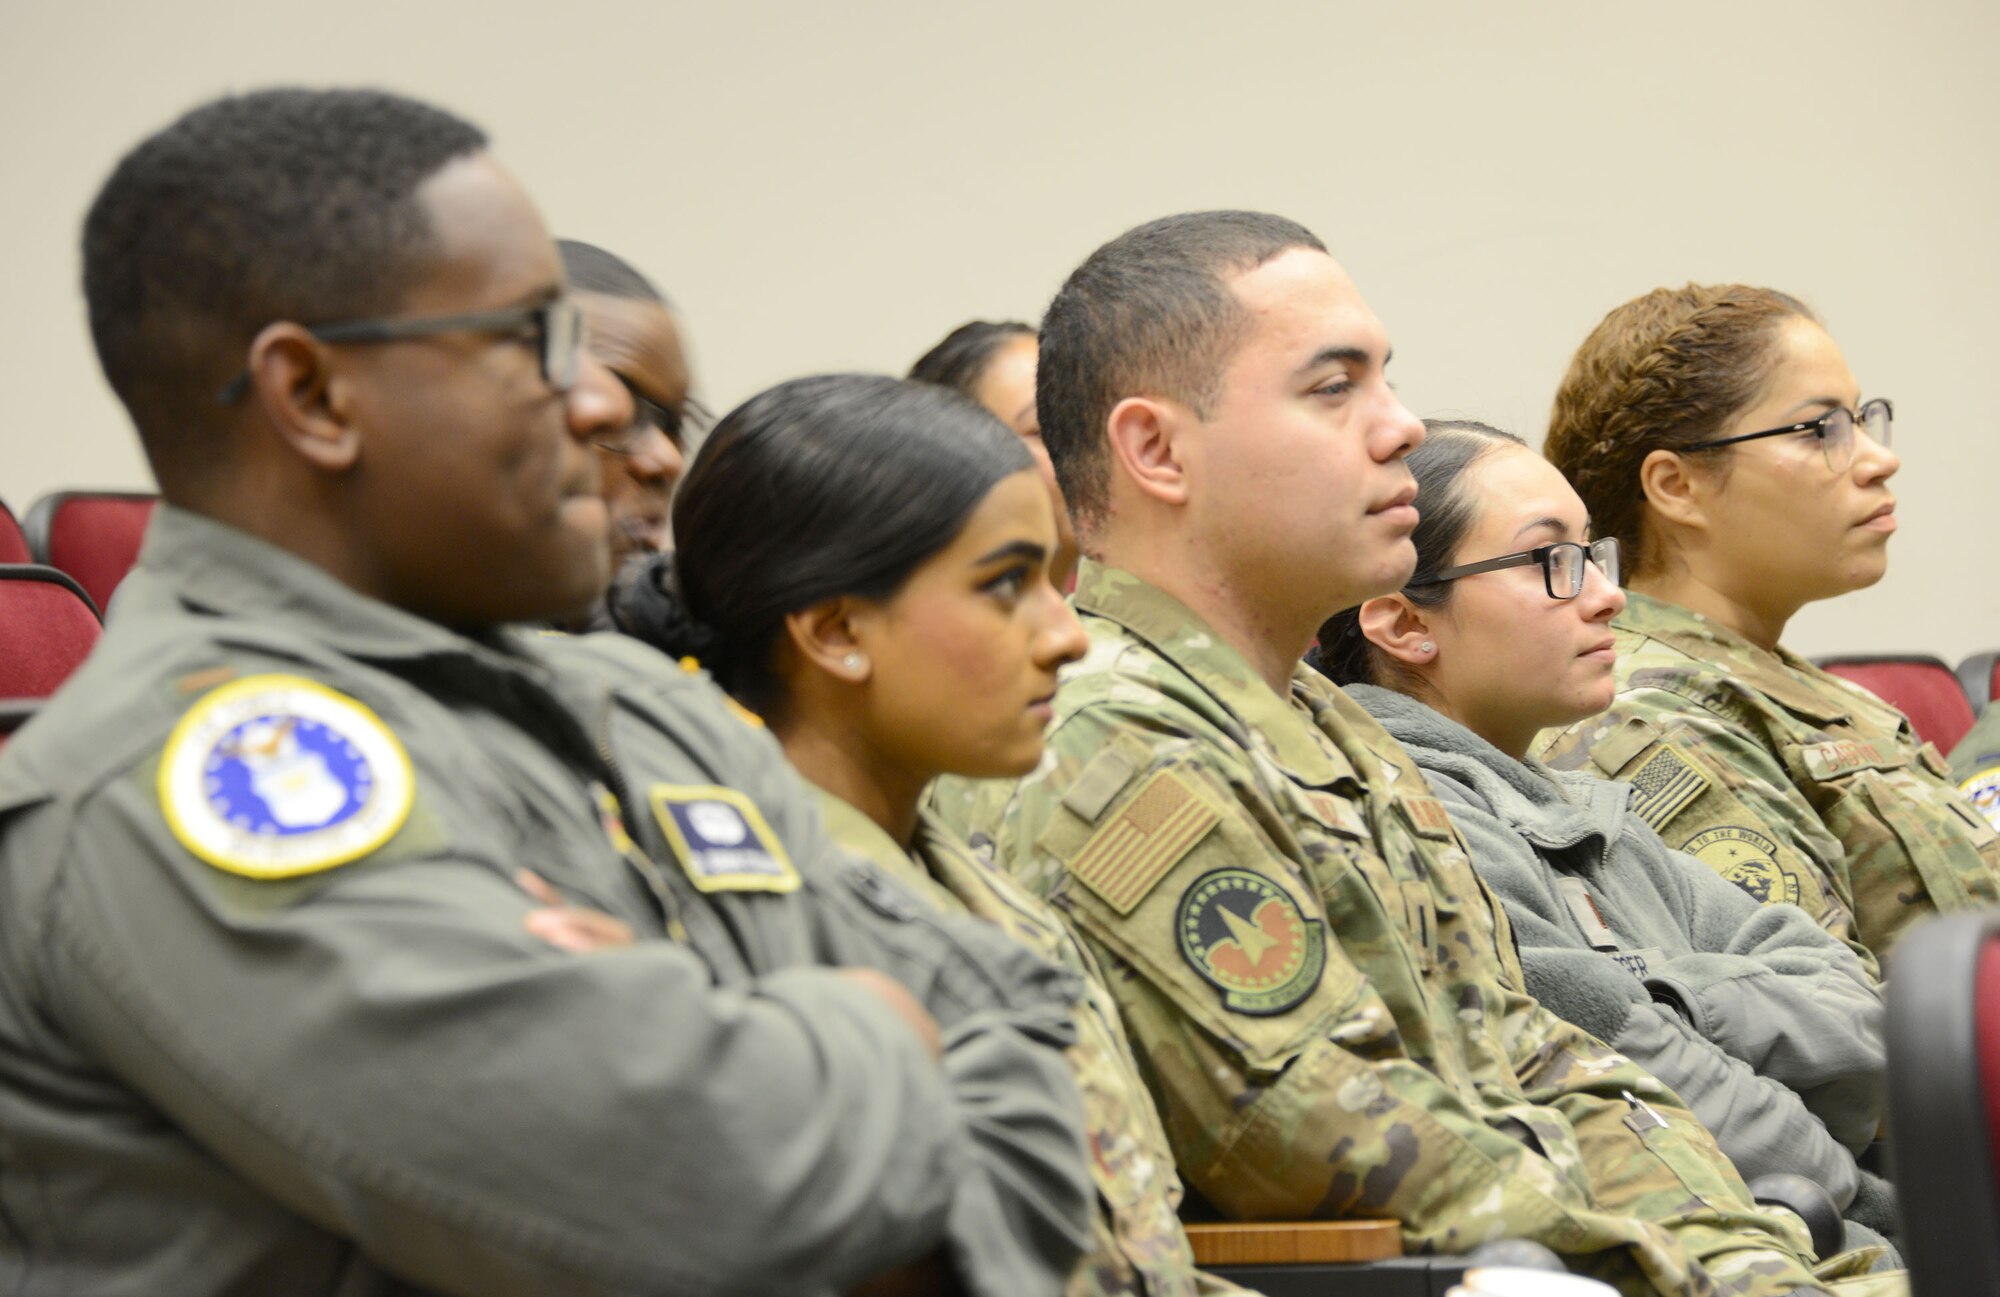 A group of Air Force mentors attend a mentoring lesson given by Air Force Recruiting Service's Detachment 1 during an Aim High outreach event at Maxwell Air Force Base, Alabama.